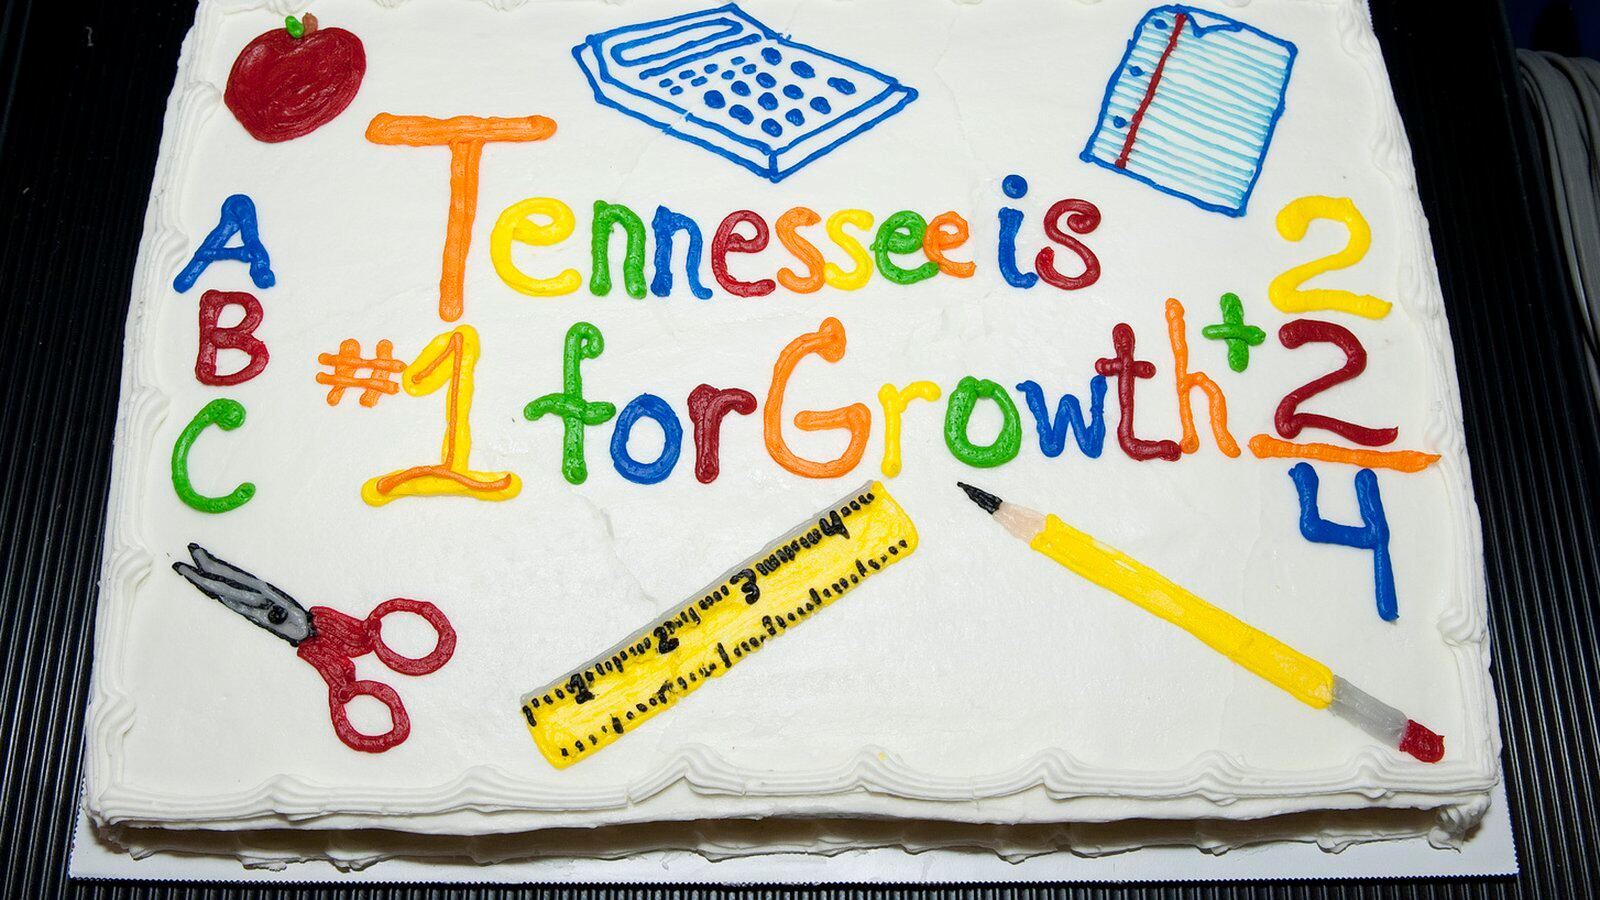 Tennessee celebrated historic gains on the Nation's Report Card in 2013.